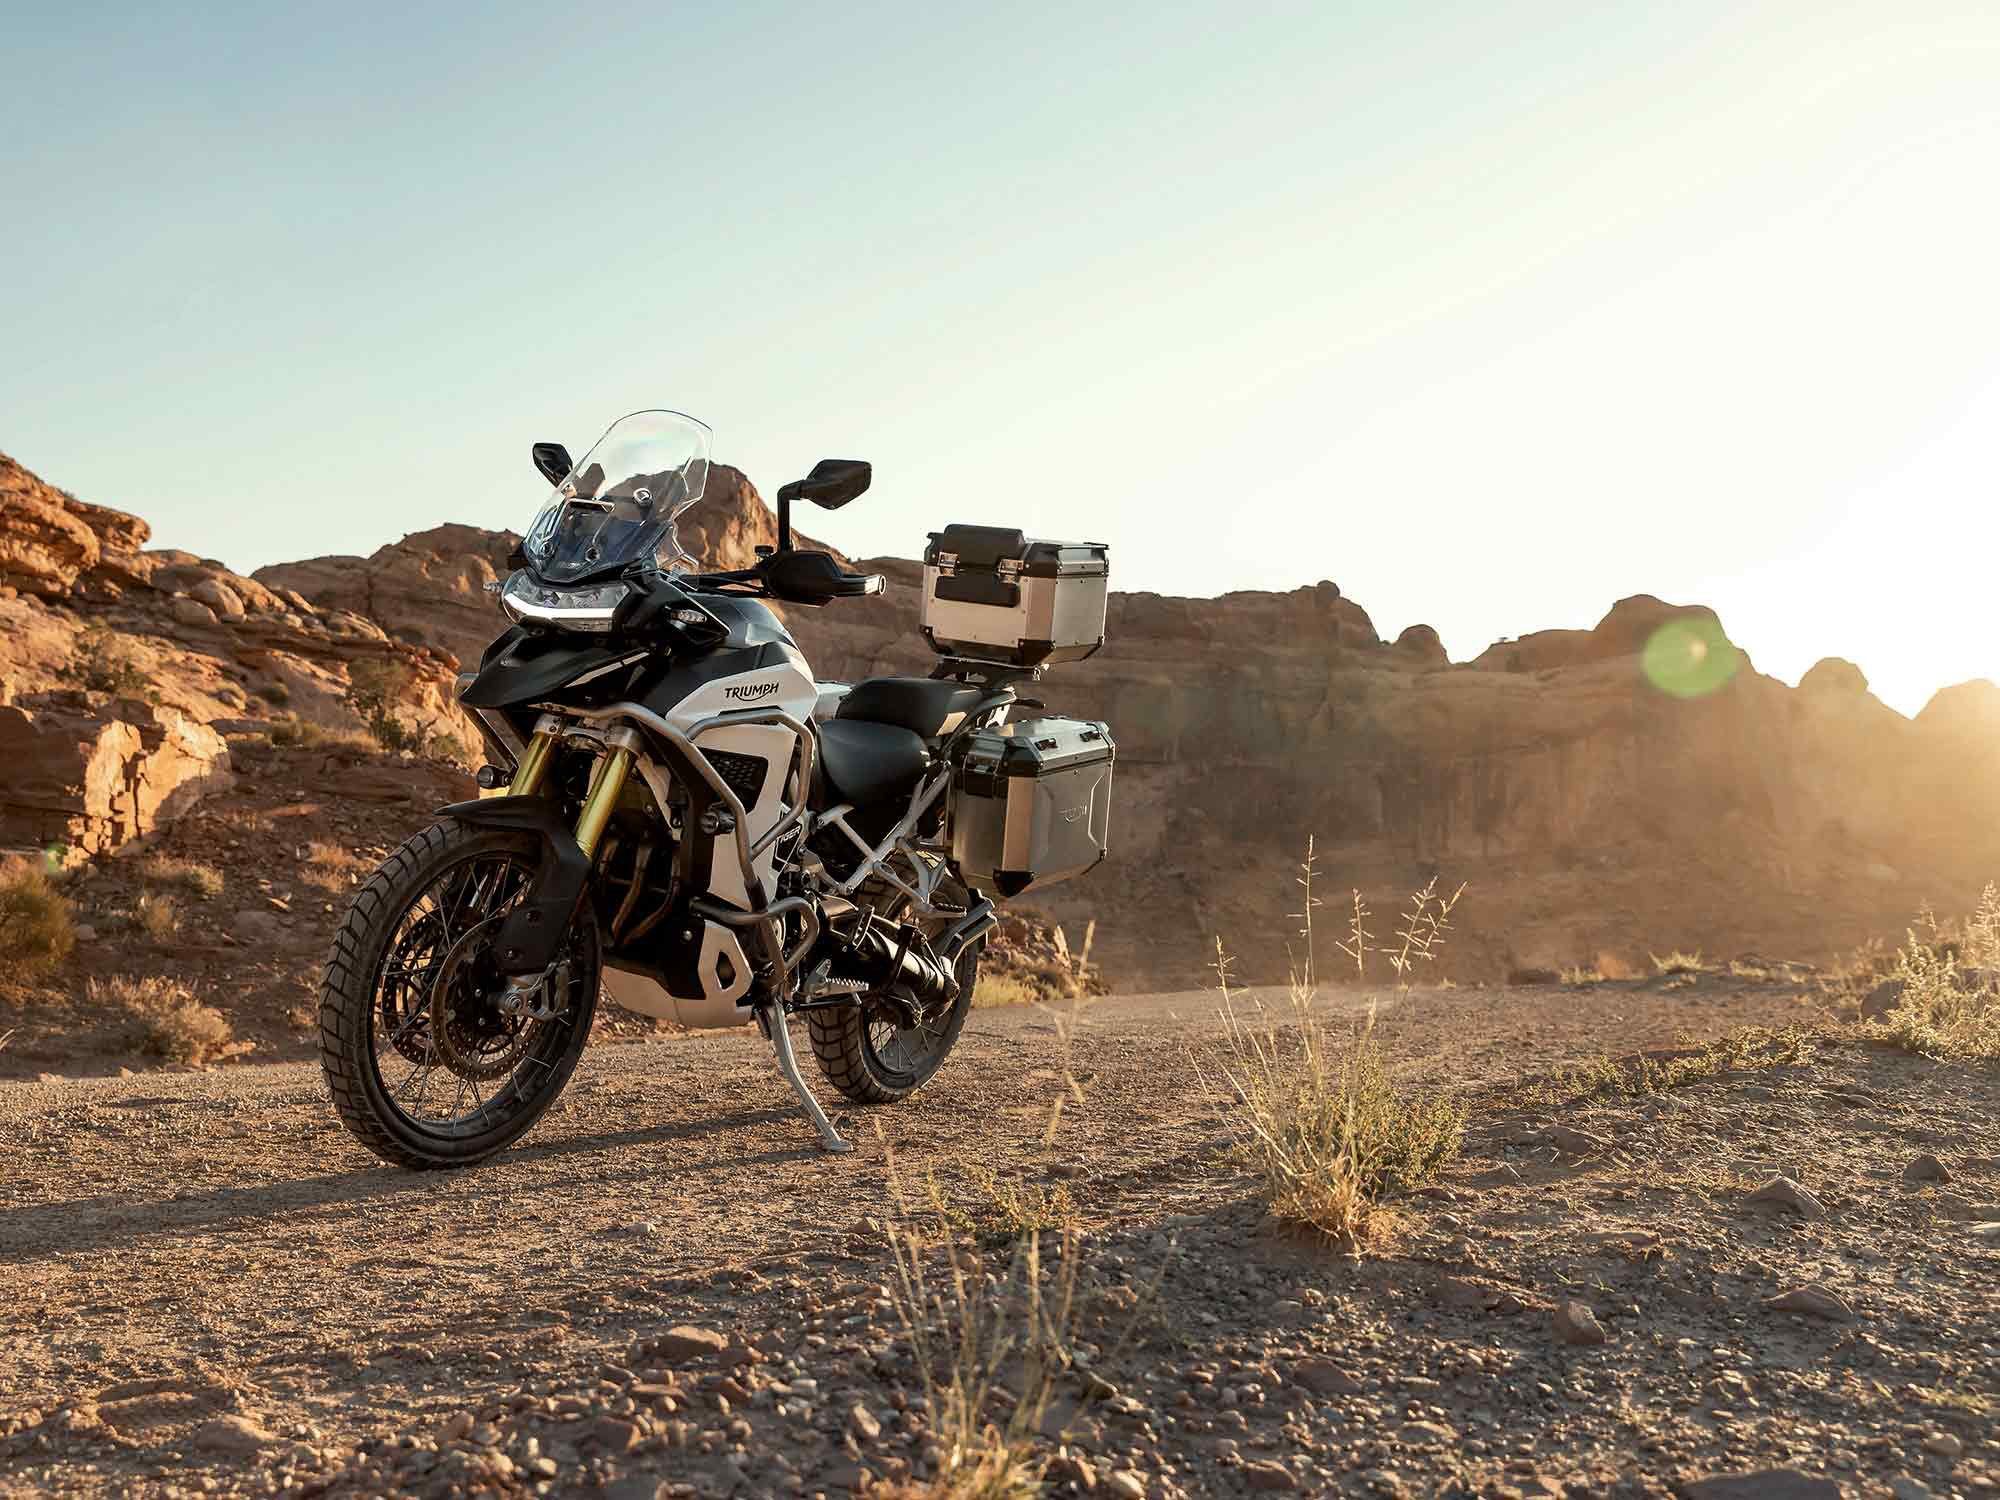 The 2022 Triumph Tiger 1200 Rally Explorer will start at $24,200.